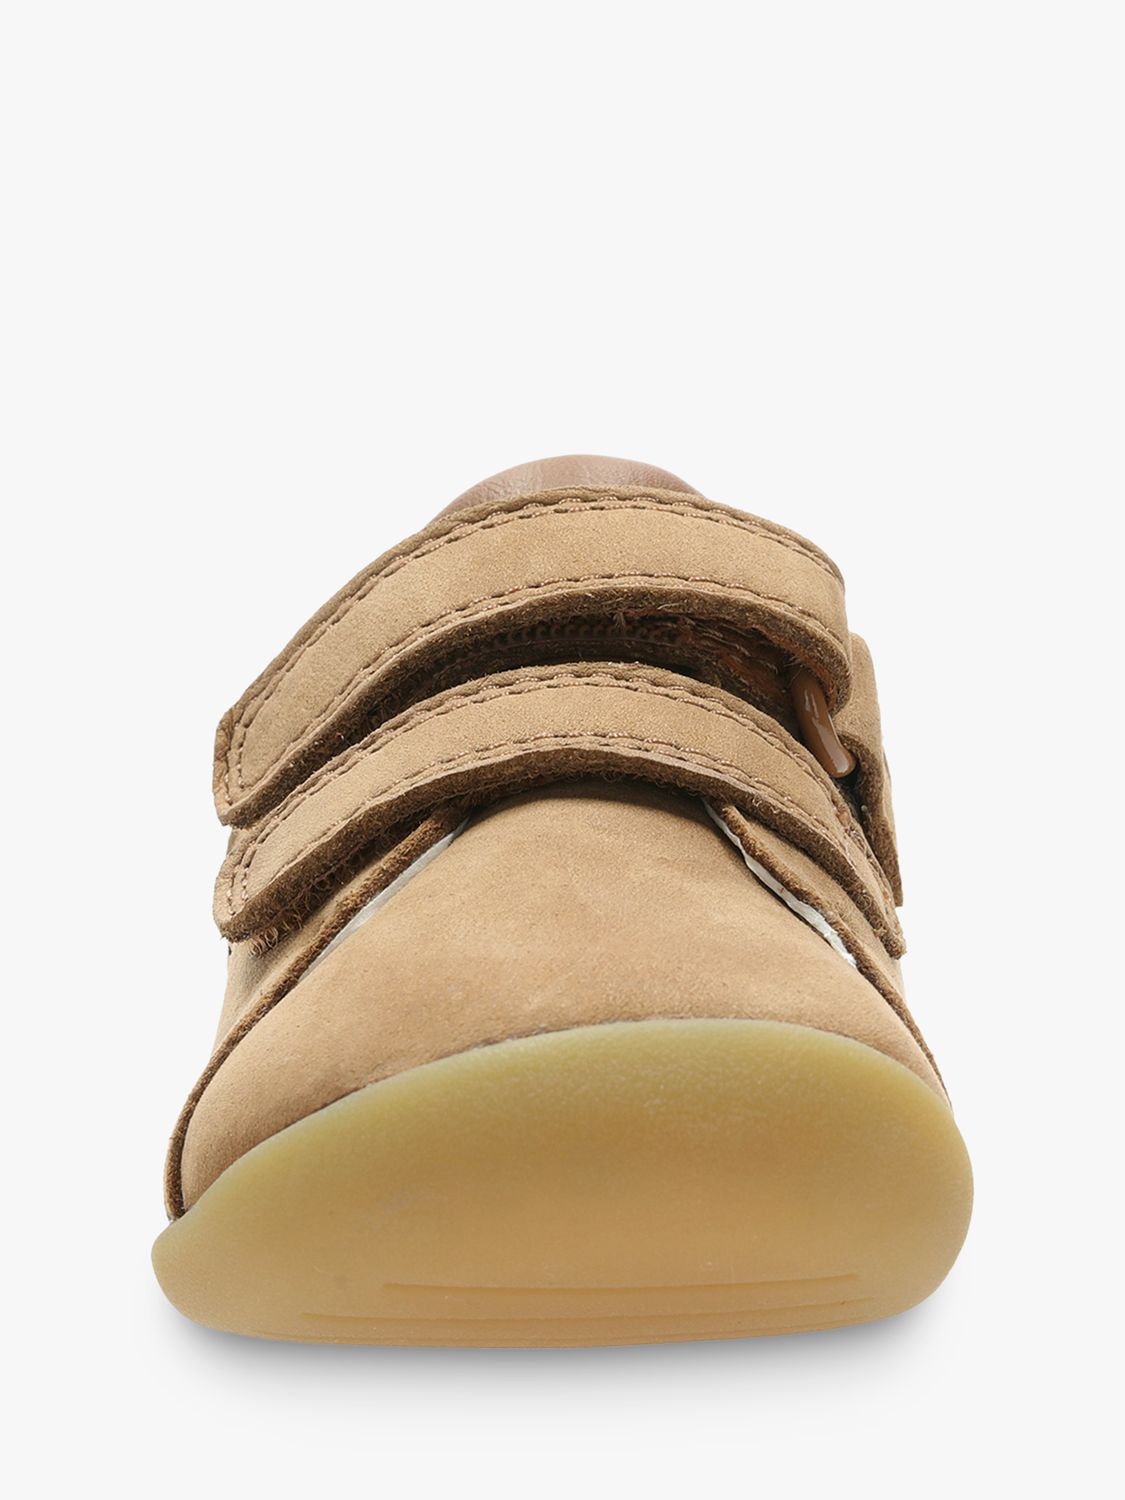 Clarks Roamer Craft Leather Shoes, Tan at John Lewis & Partners